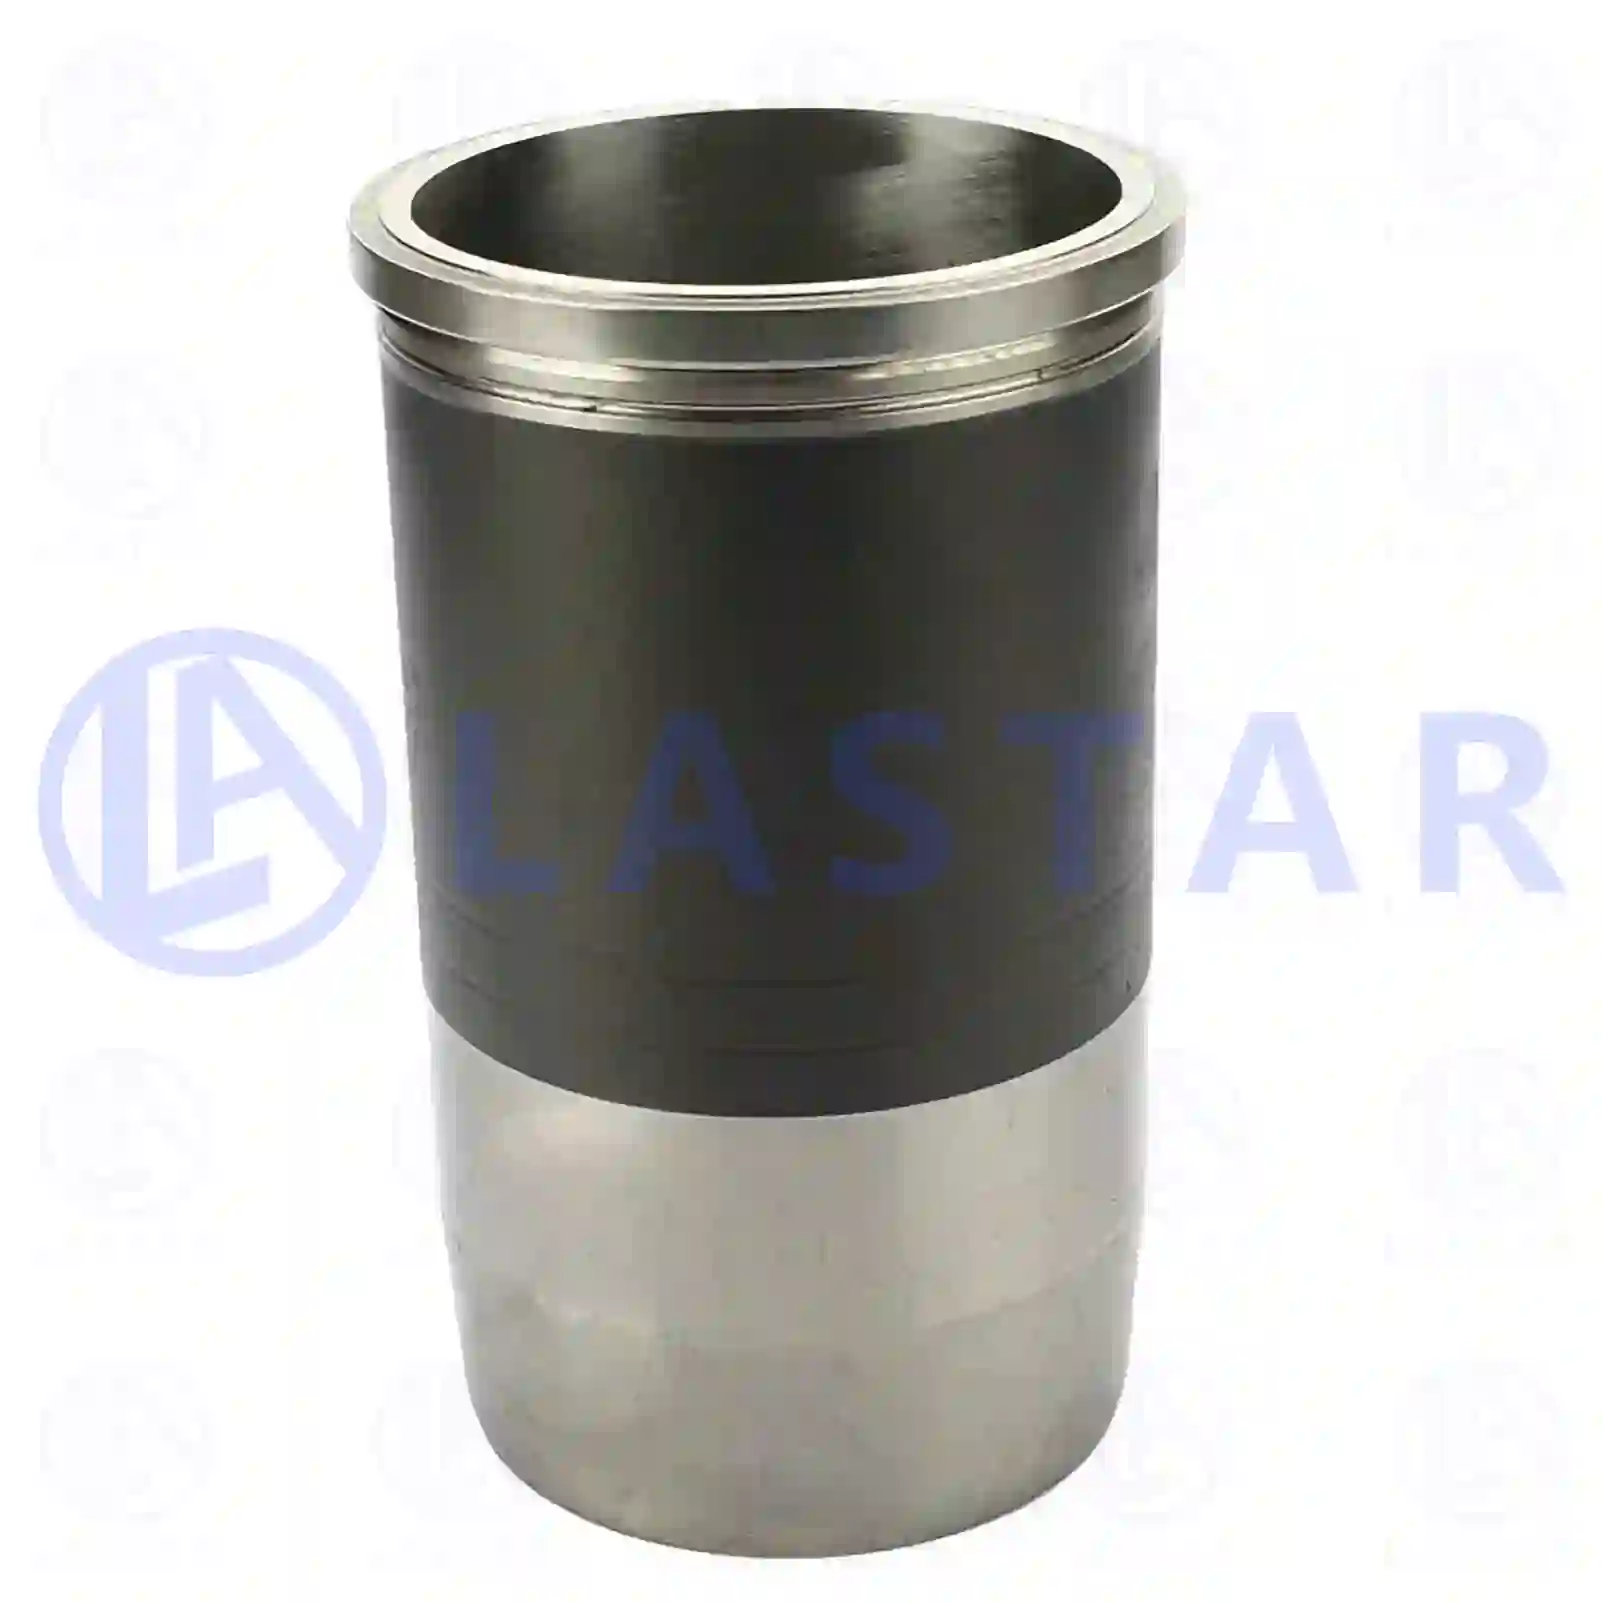 Cylinder liner, without seal rings, 77701977, 4420110010, 4420110110, 4420110310, 4440110010, ZG01081-0008 ||  77701977 Lastar Spare Part | Truck Spare Parts, Auotomotive Spare Parts Cylinder liner, without seal rings, 77701977, 4420110010, 4420110110, 4420110310, 4440110010, ZG01081-0008 ||  77701977 Lastar Spare Part | Truck Spare Parts, Auotomotive Spare Parts